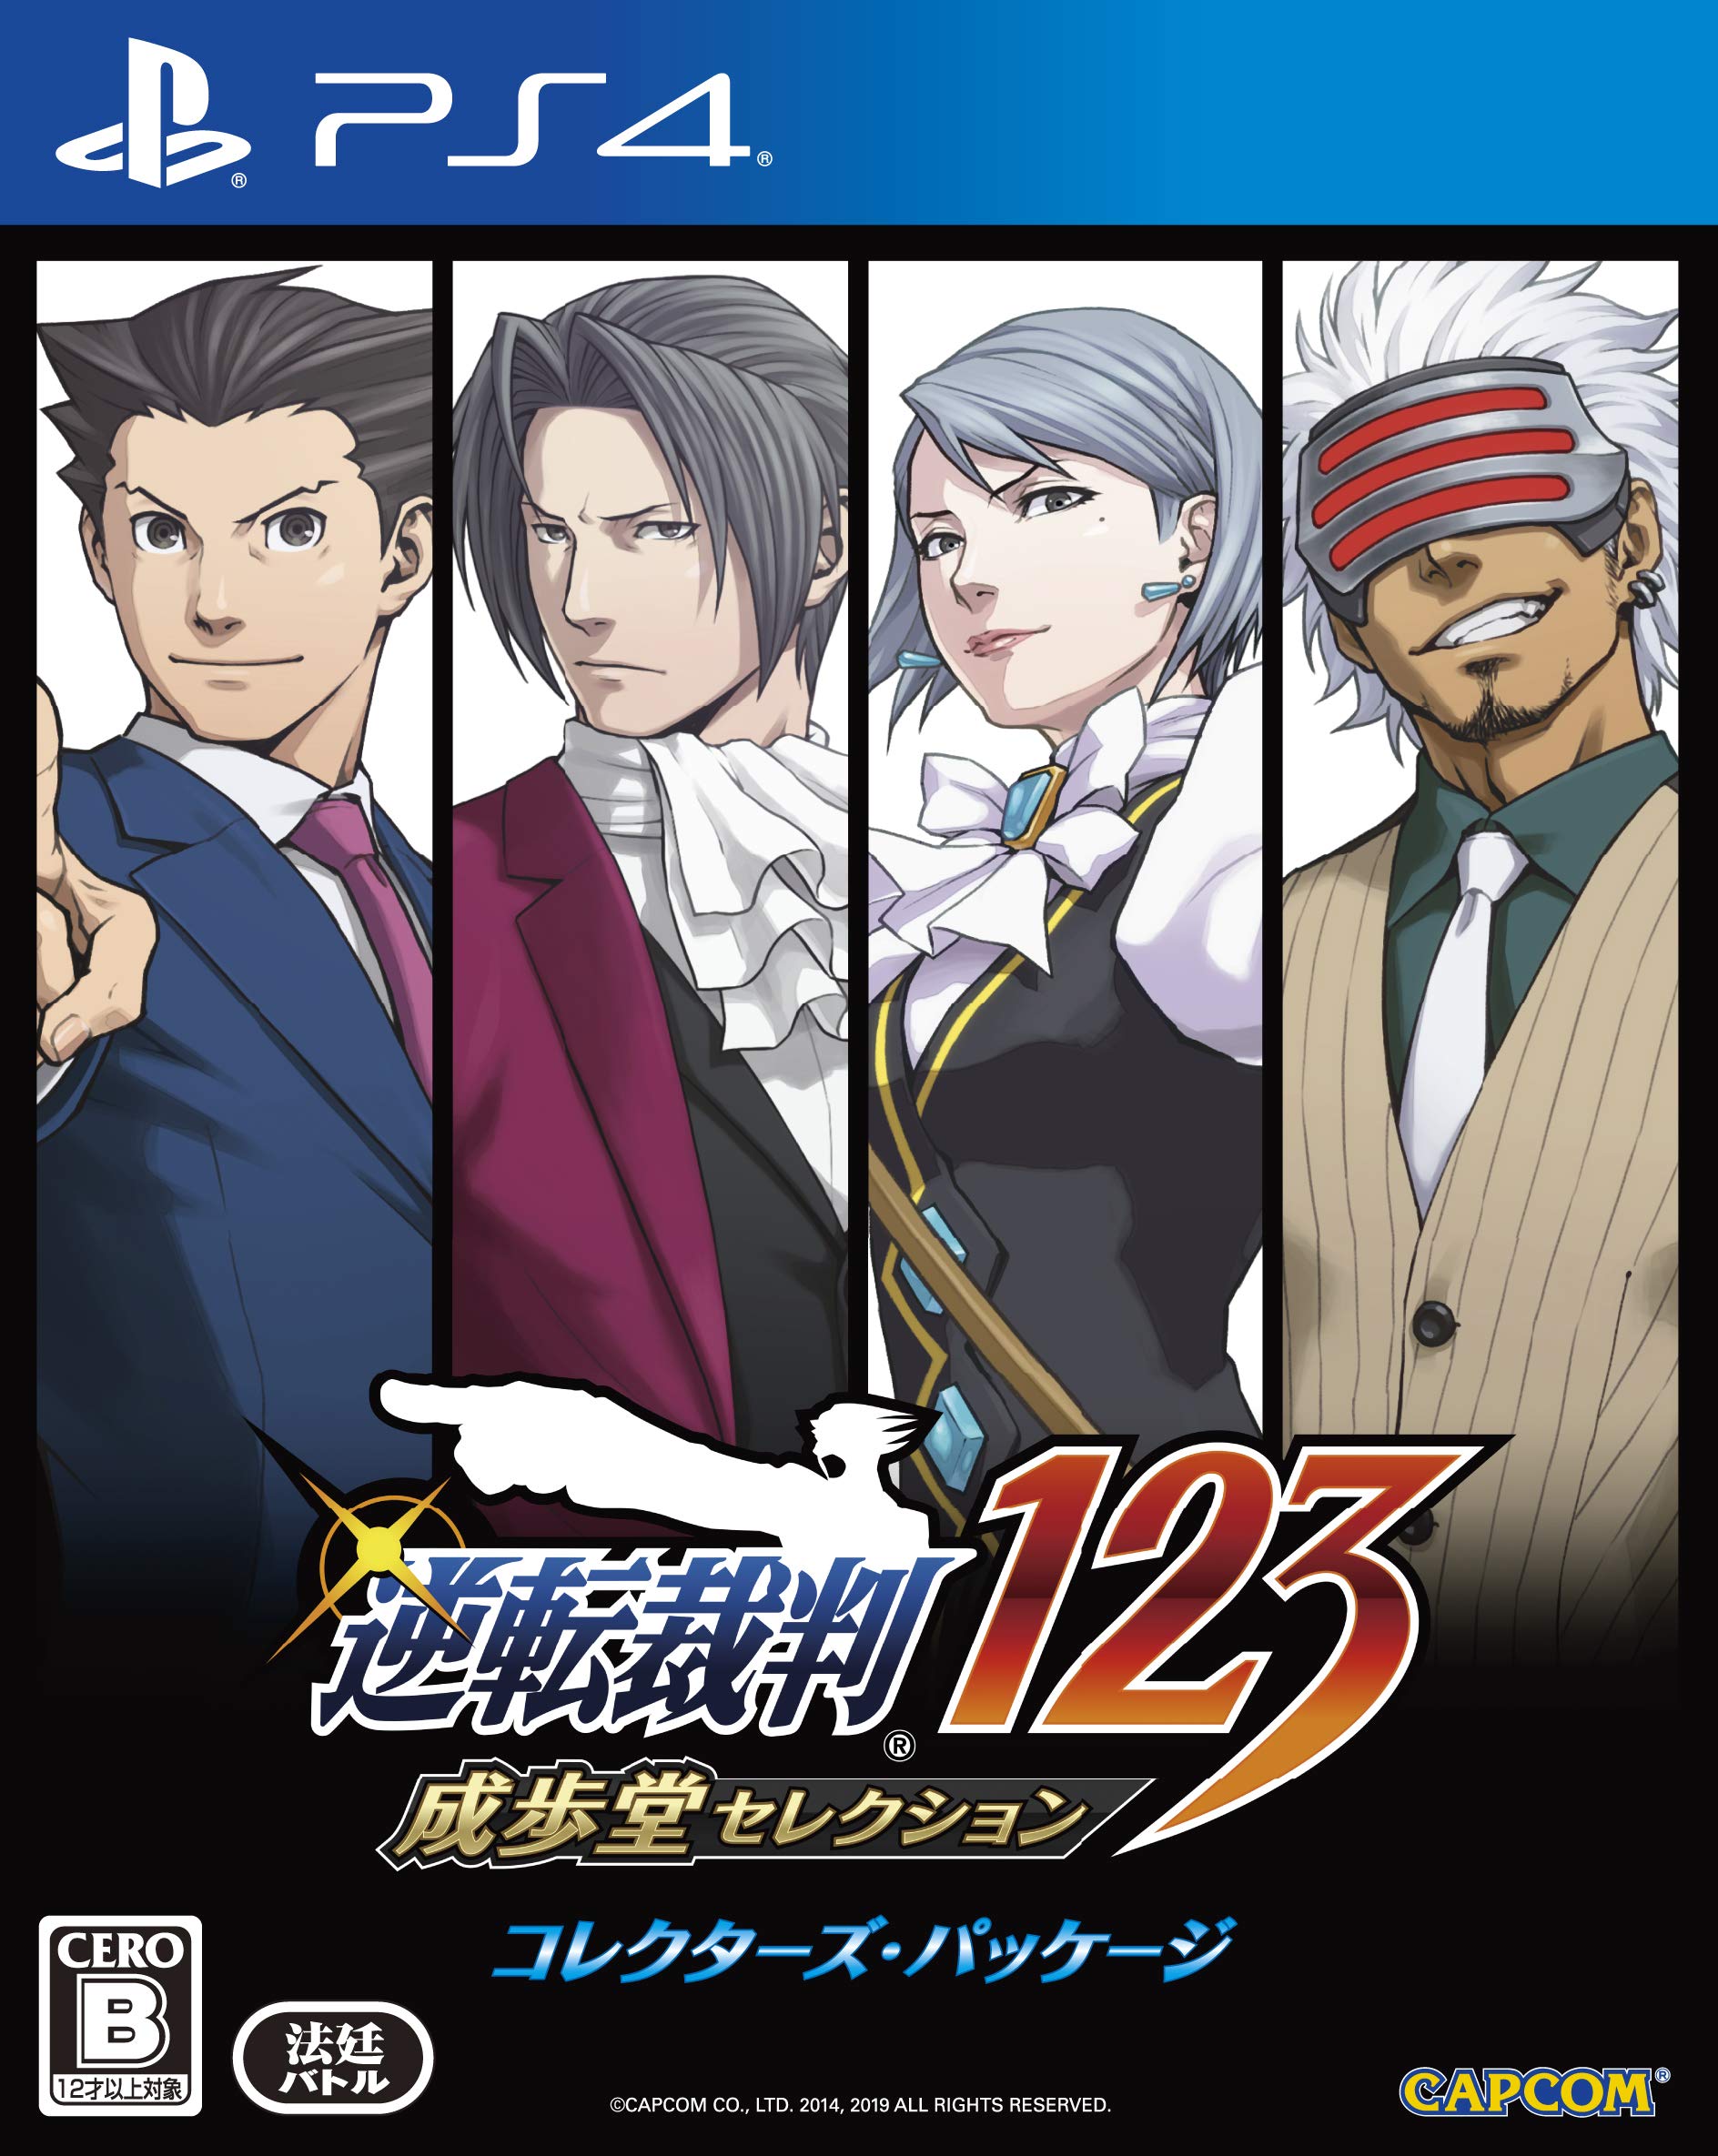 PS4 Phoenix Wright Ace Attorney Trilogy (English Subs) for PlayStation 4